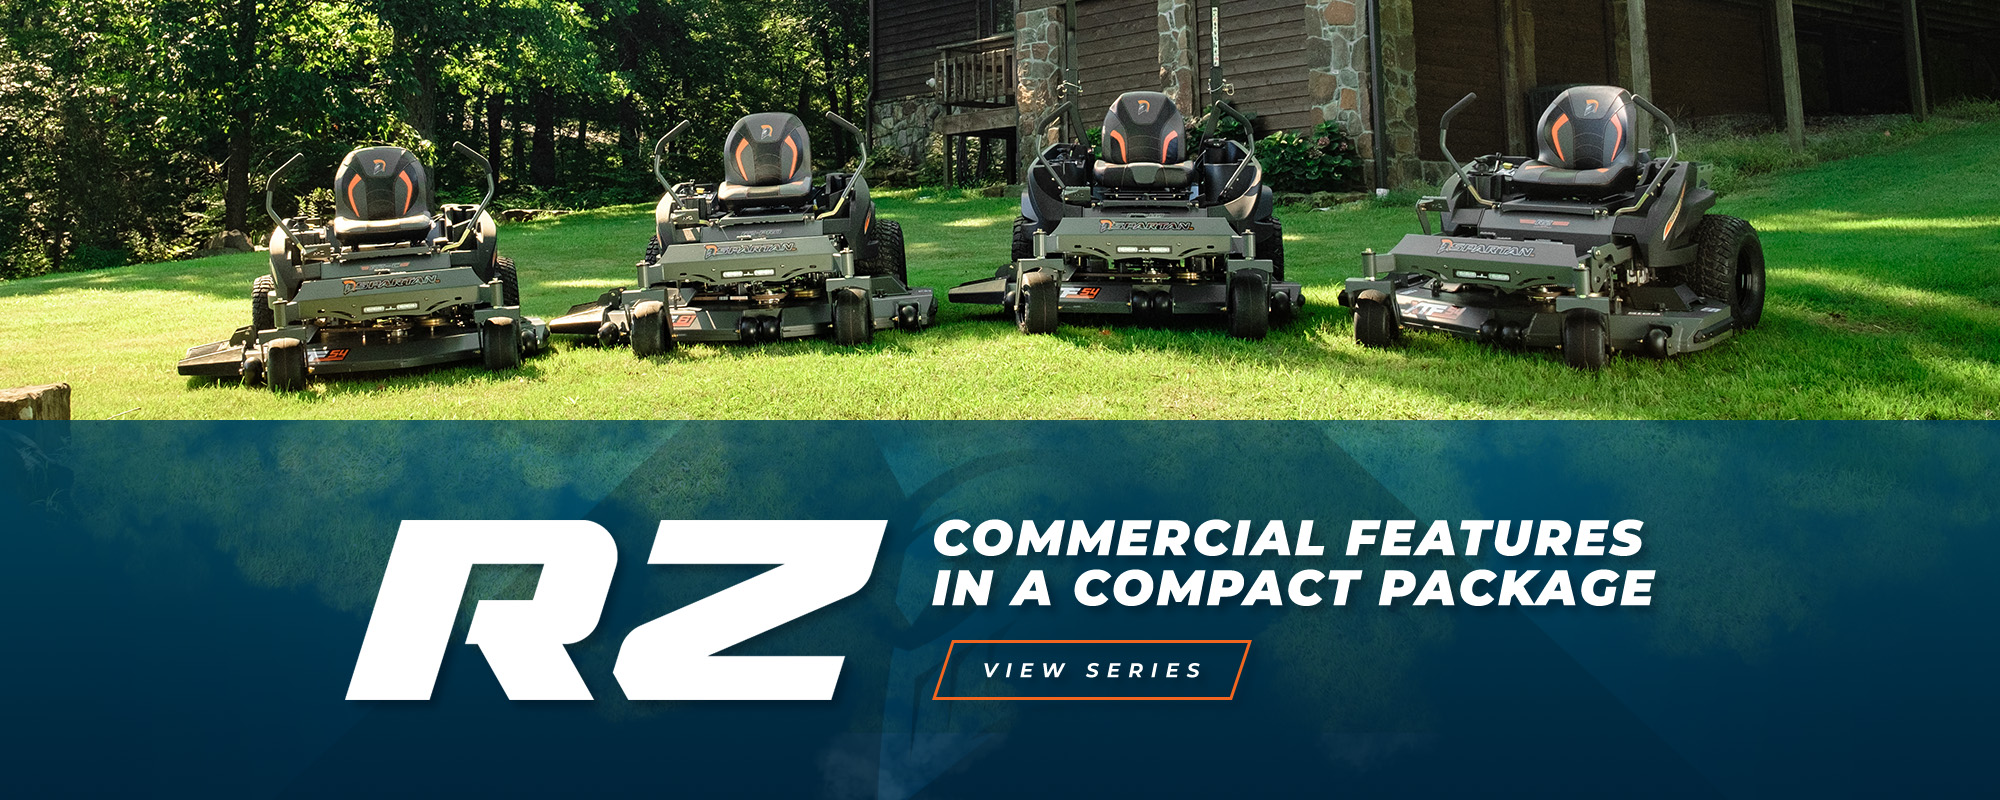 RZ mower ad. Commercial features in a compact package